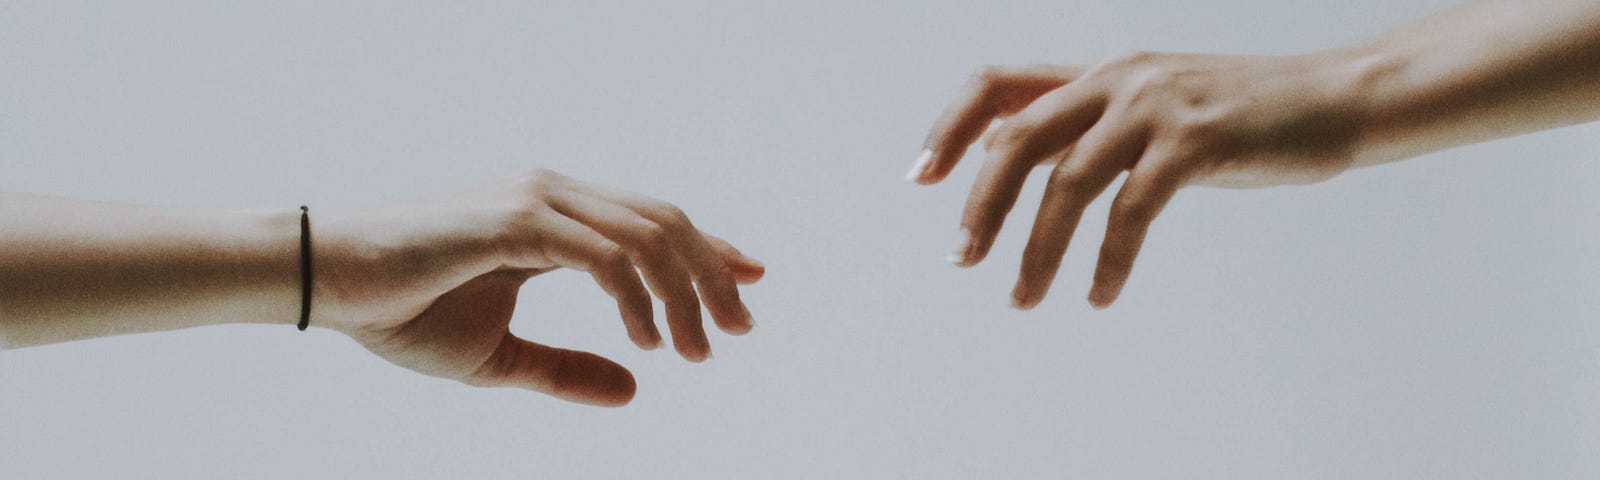 Hand reaching out to another hand